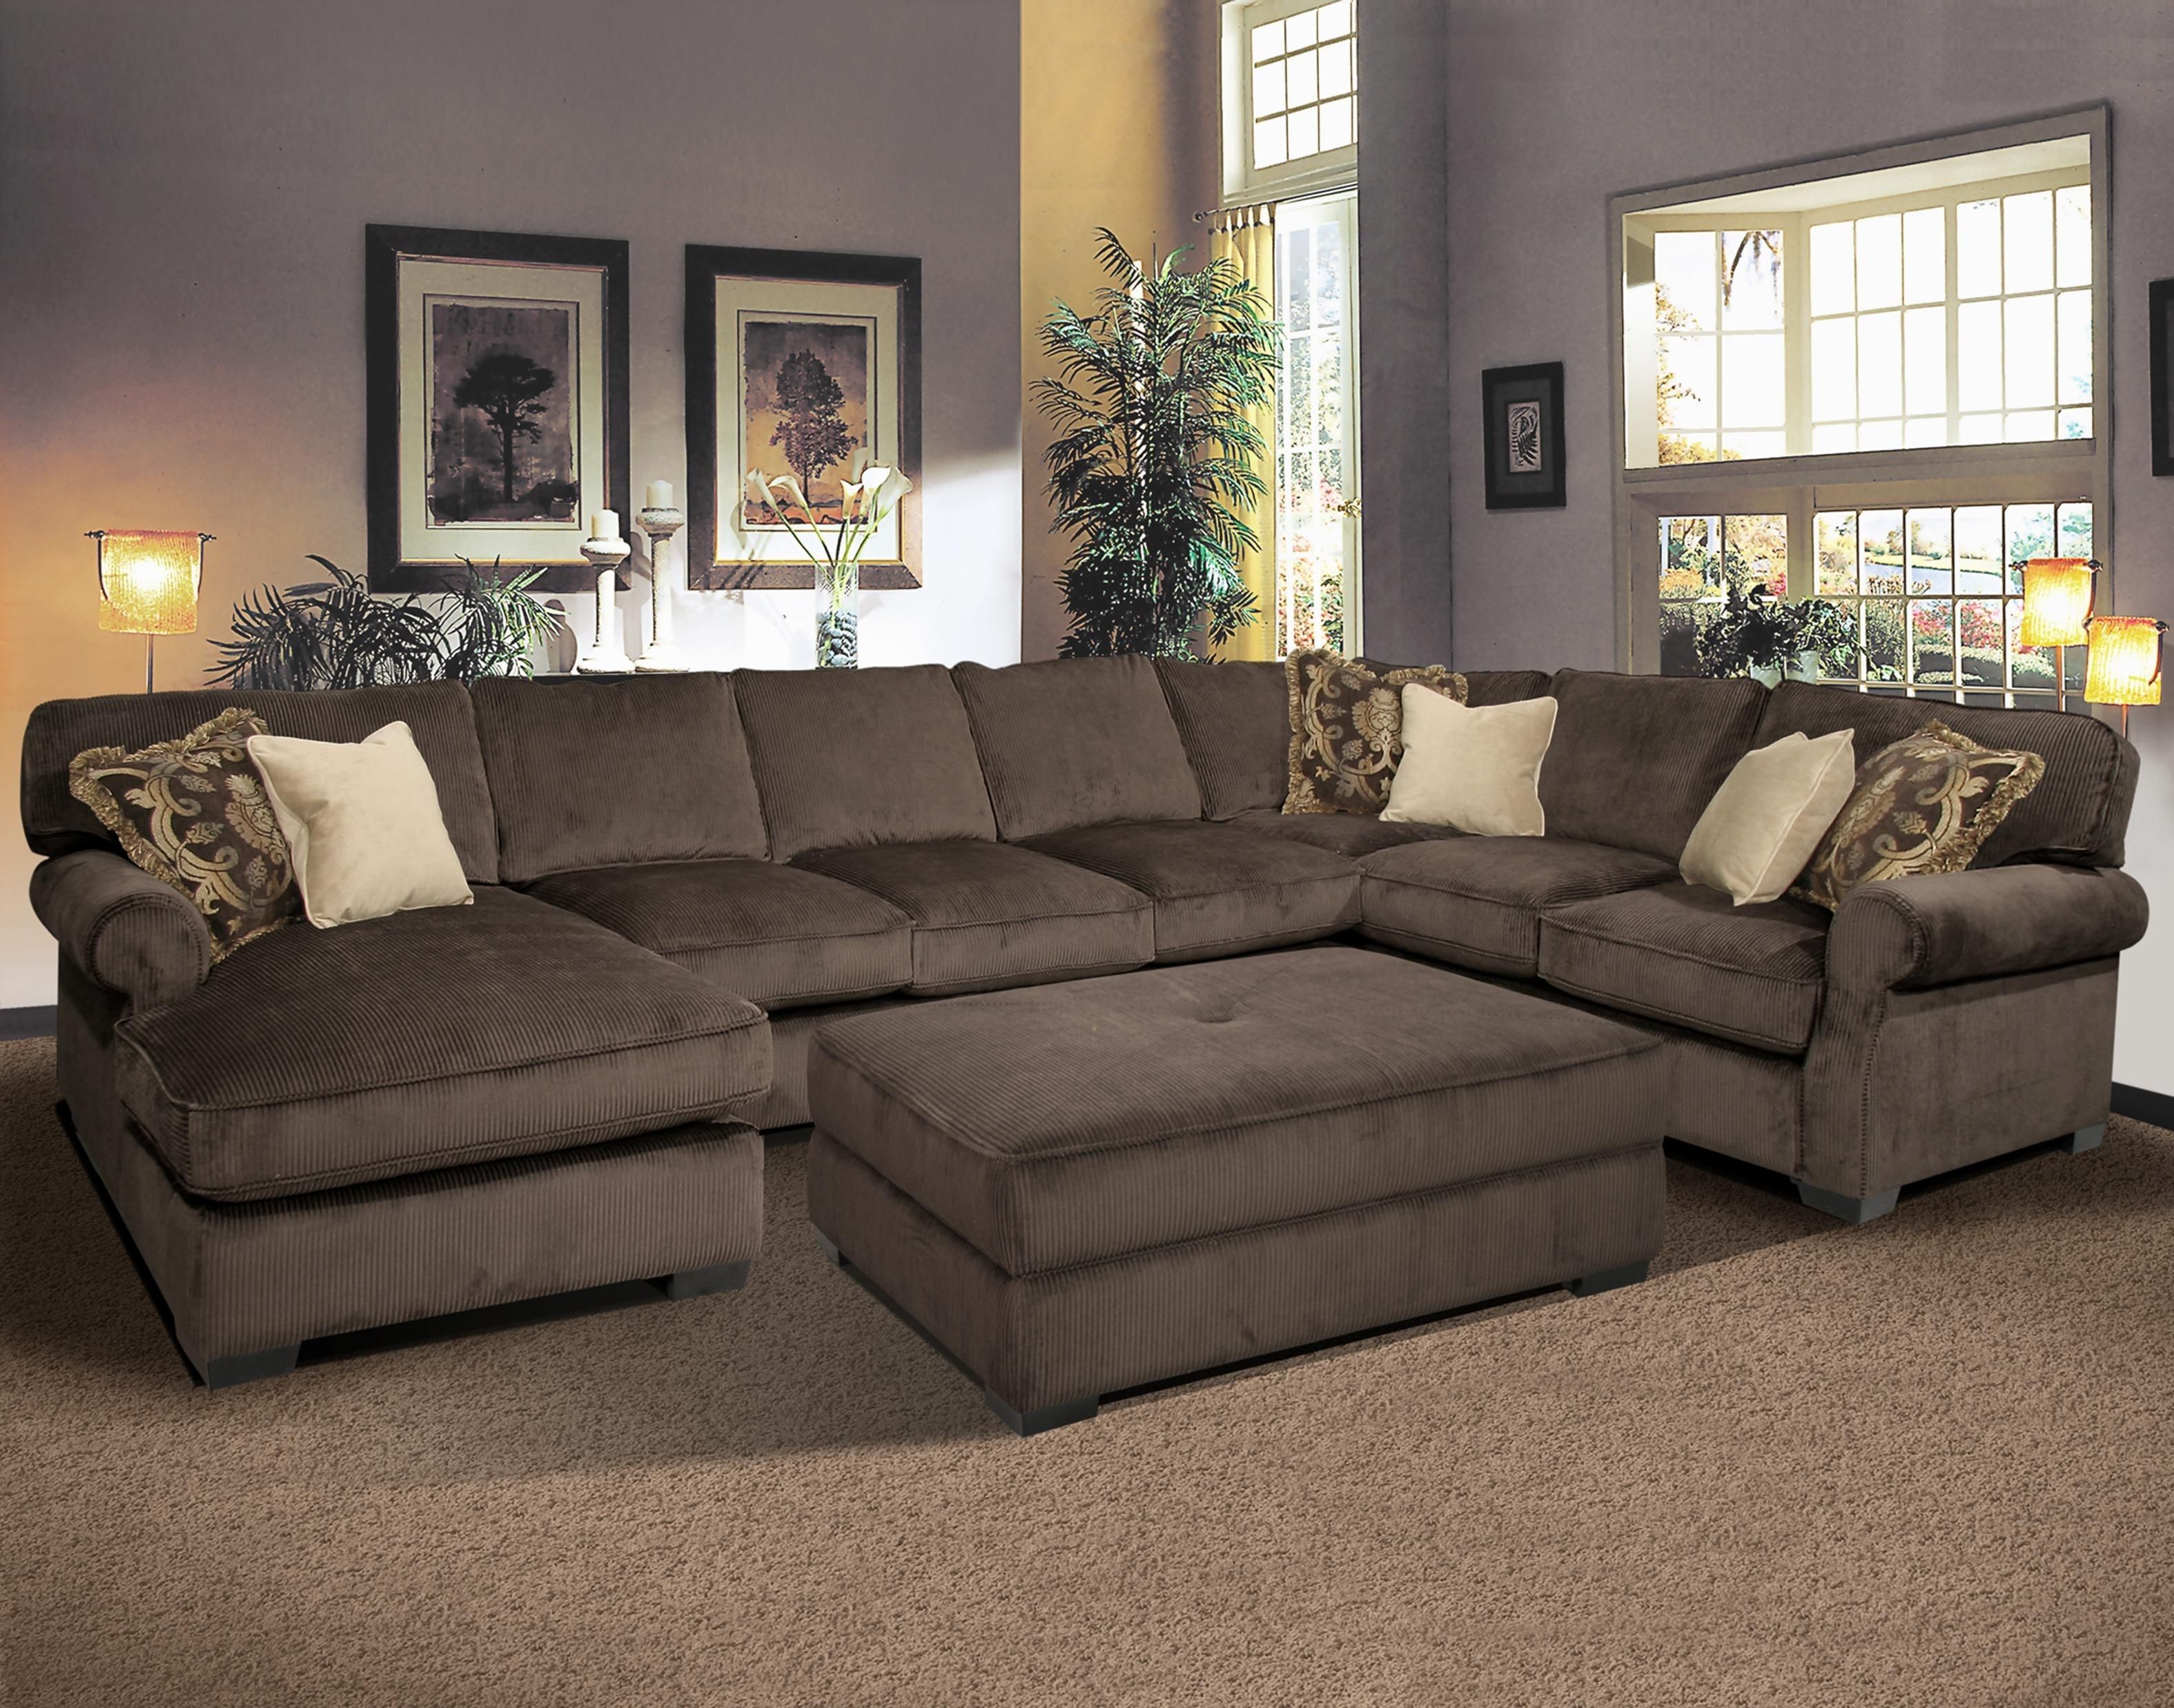 Featured Photo of 10 Collection of Sectional Sofas with Oversized Ottoman